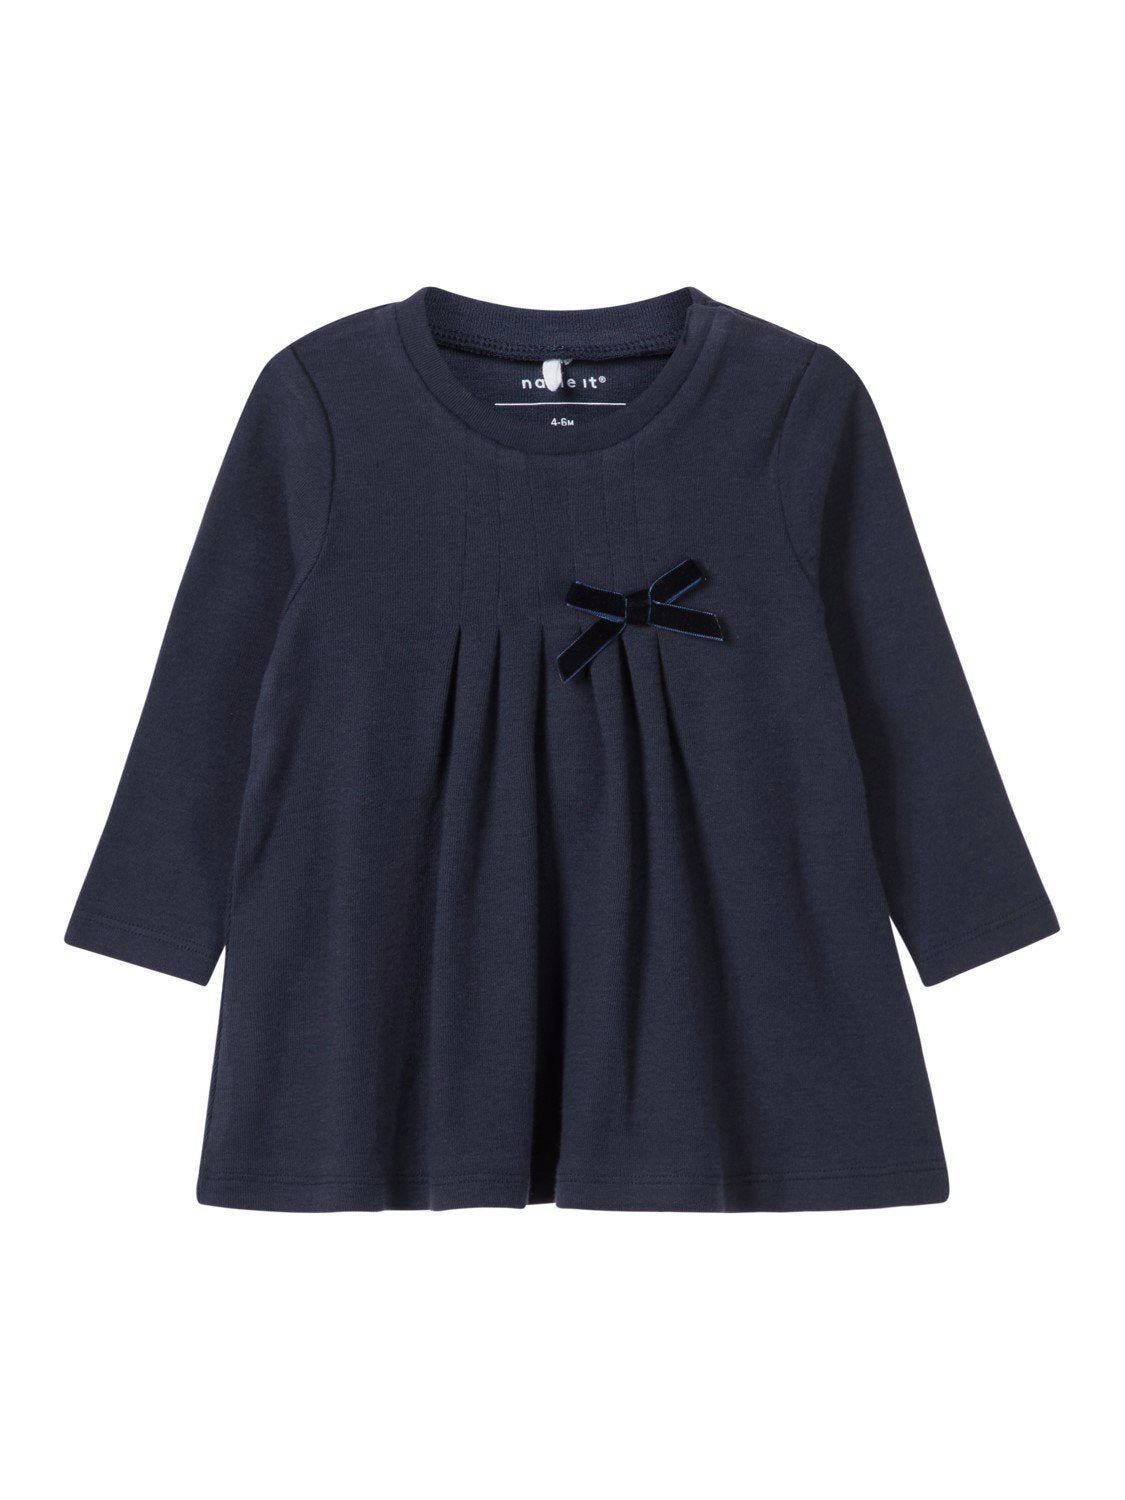 Name it Baby Girl Organic Cotton Long Sleeved Navy Tunic with Bow Detail FRONT